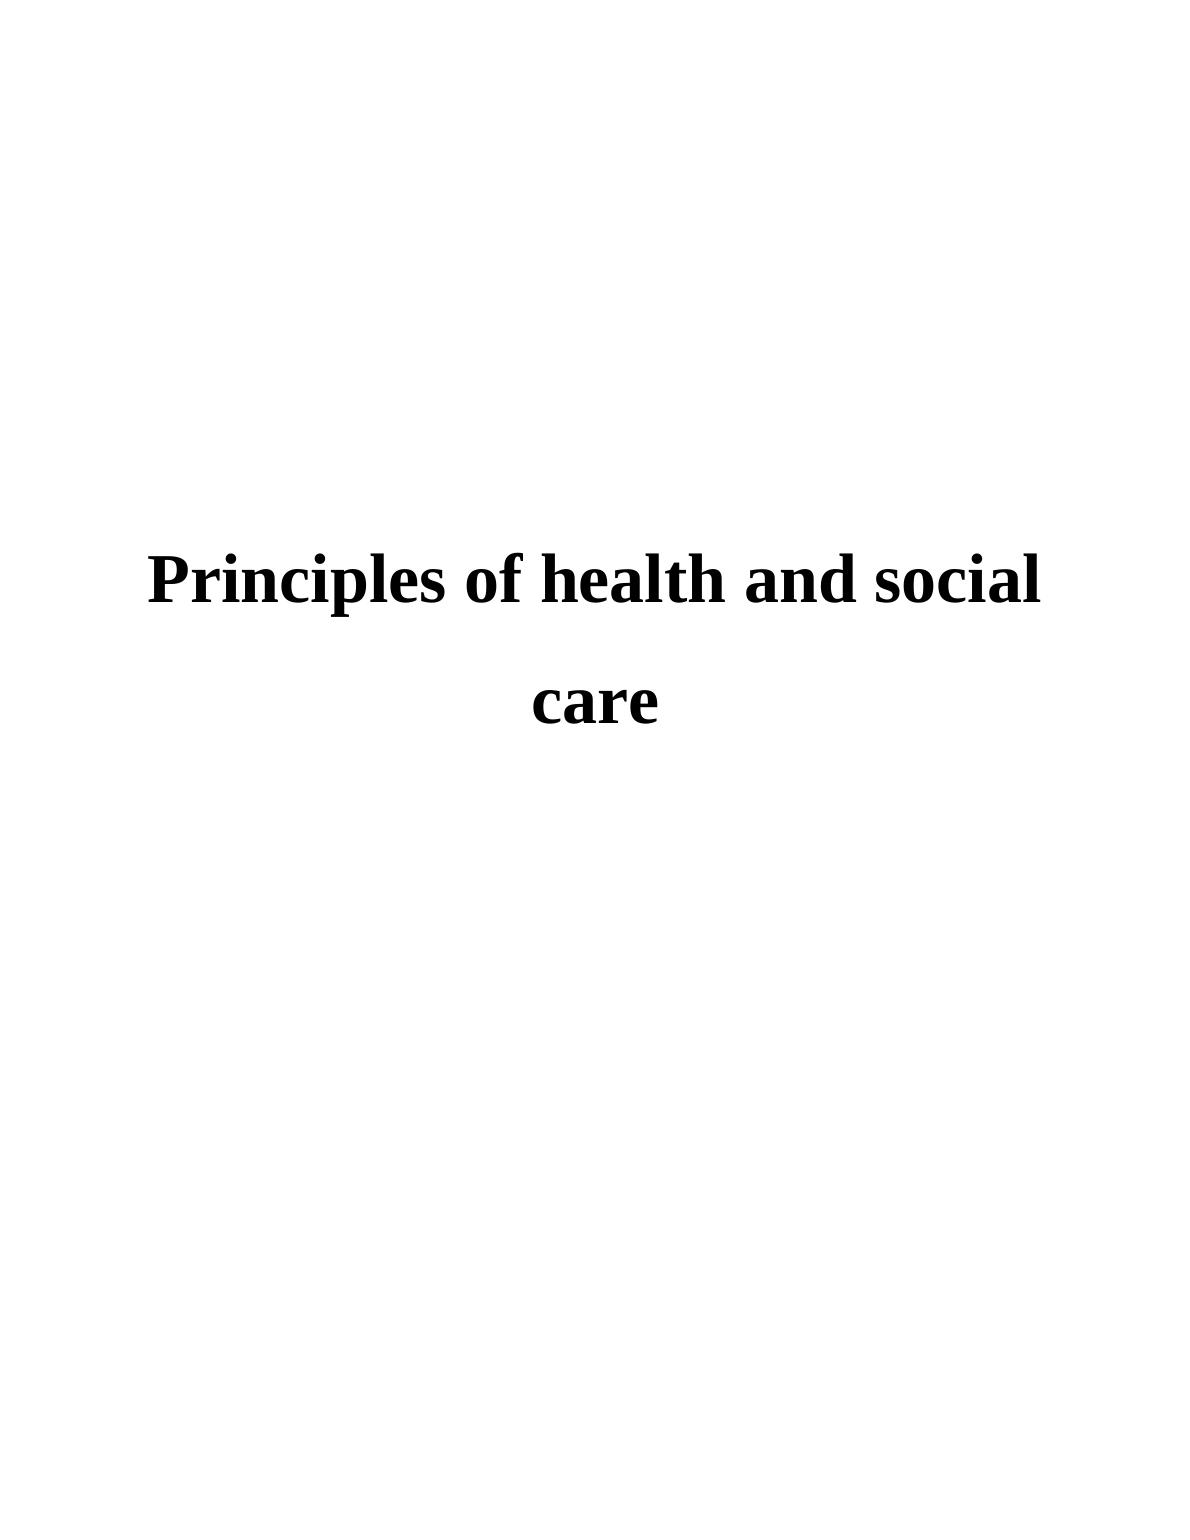 Principles of Health and Social Care Assignment (Doc)_1